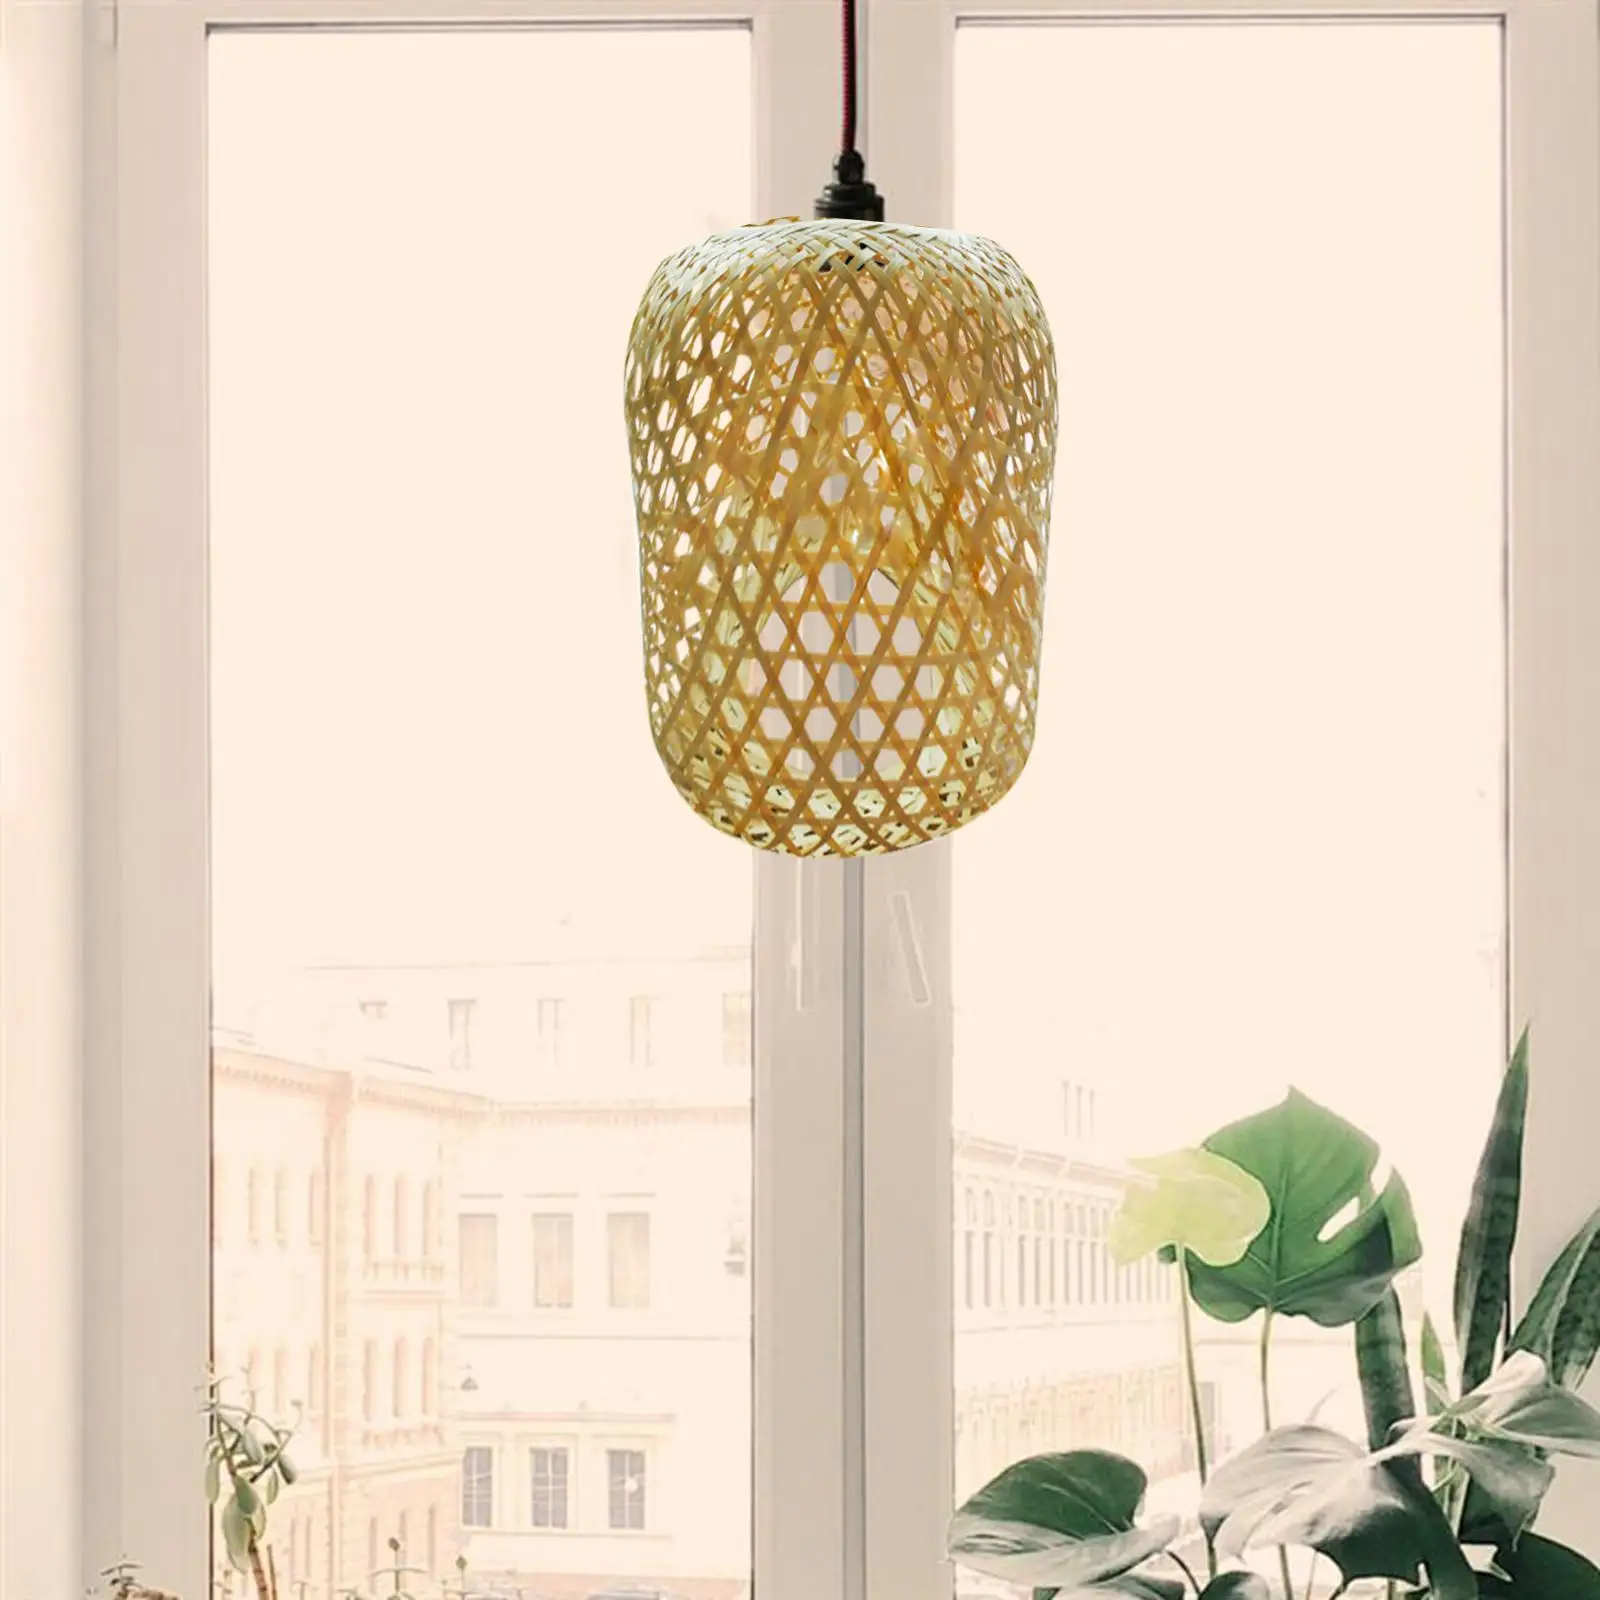 Bamboo Lamp Shade Pendant Light Cover Decorative Hanging Lantern Lamp Accessory for Bedroom Tea House Home Farm Decoration